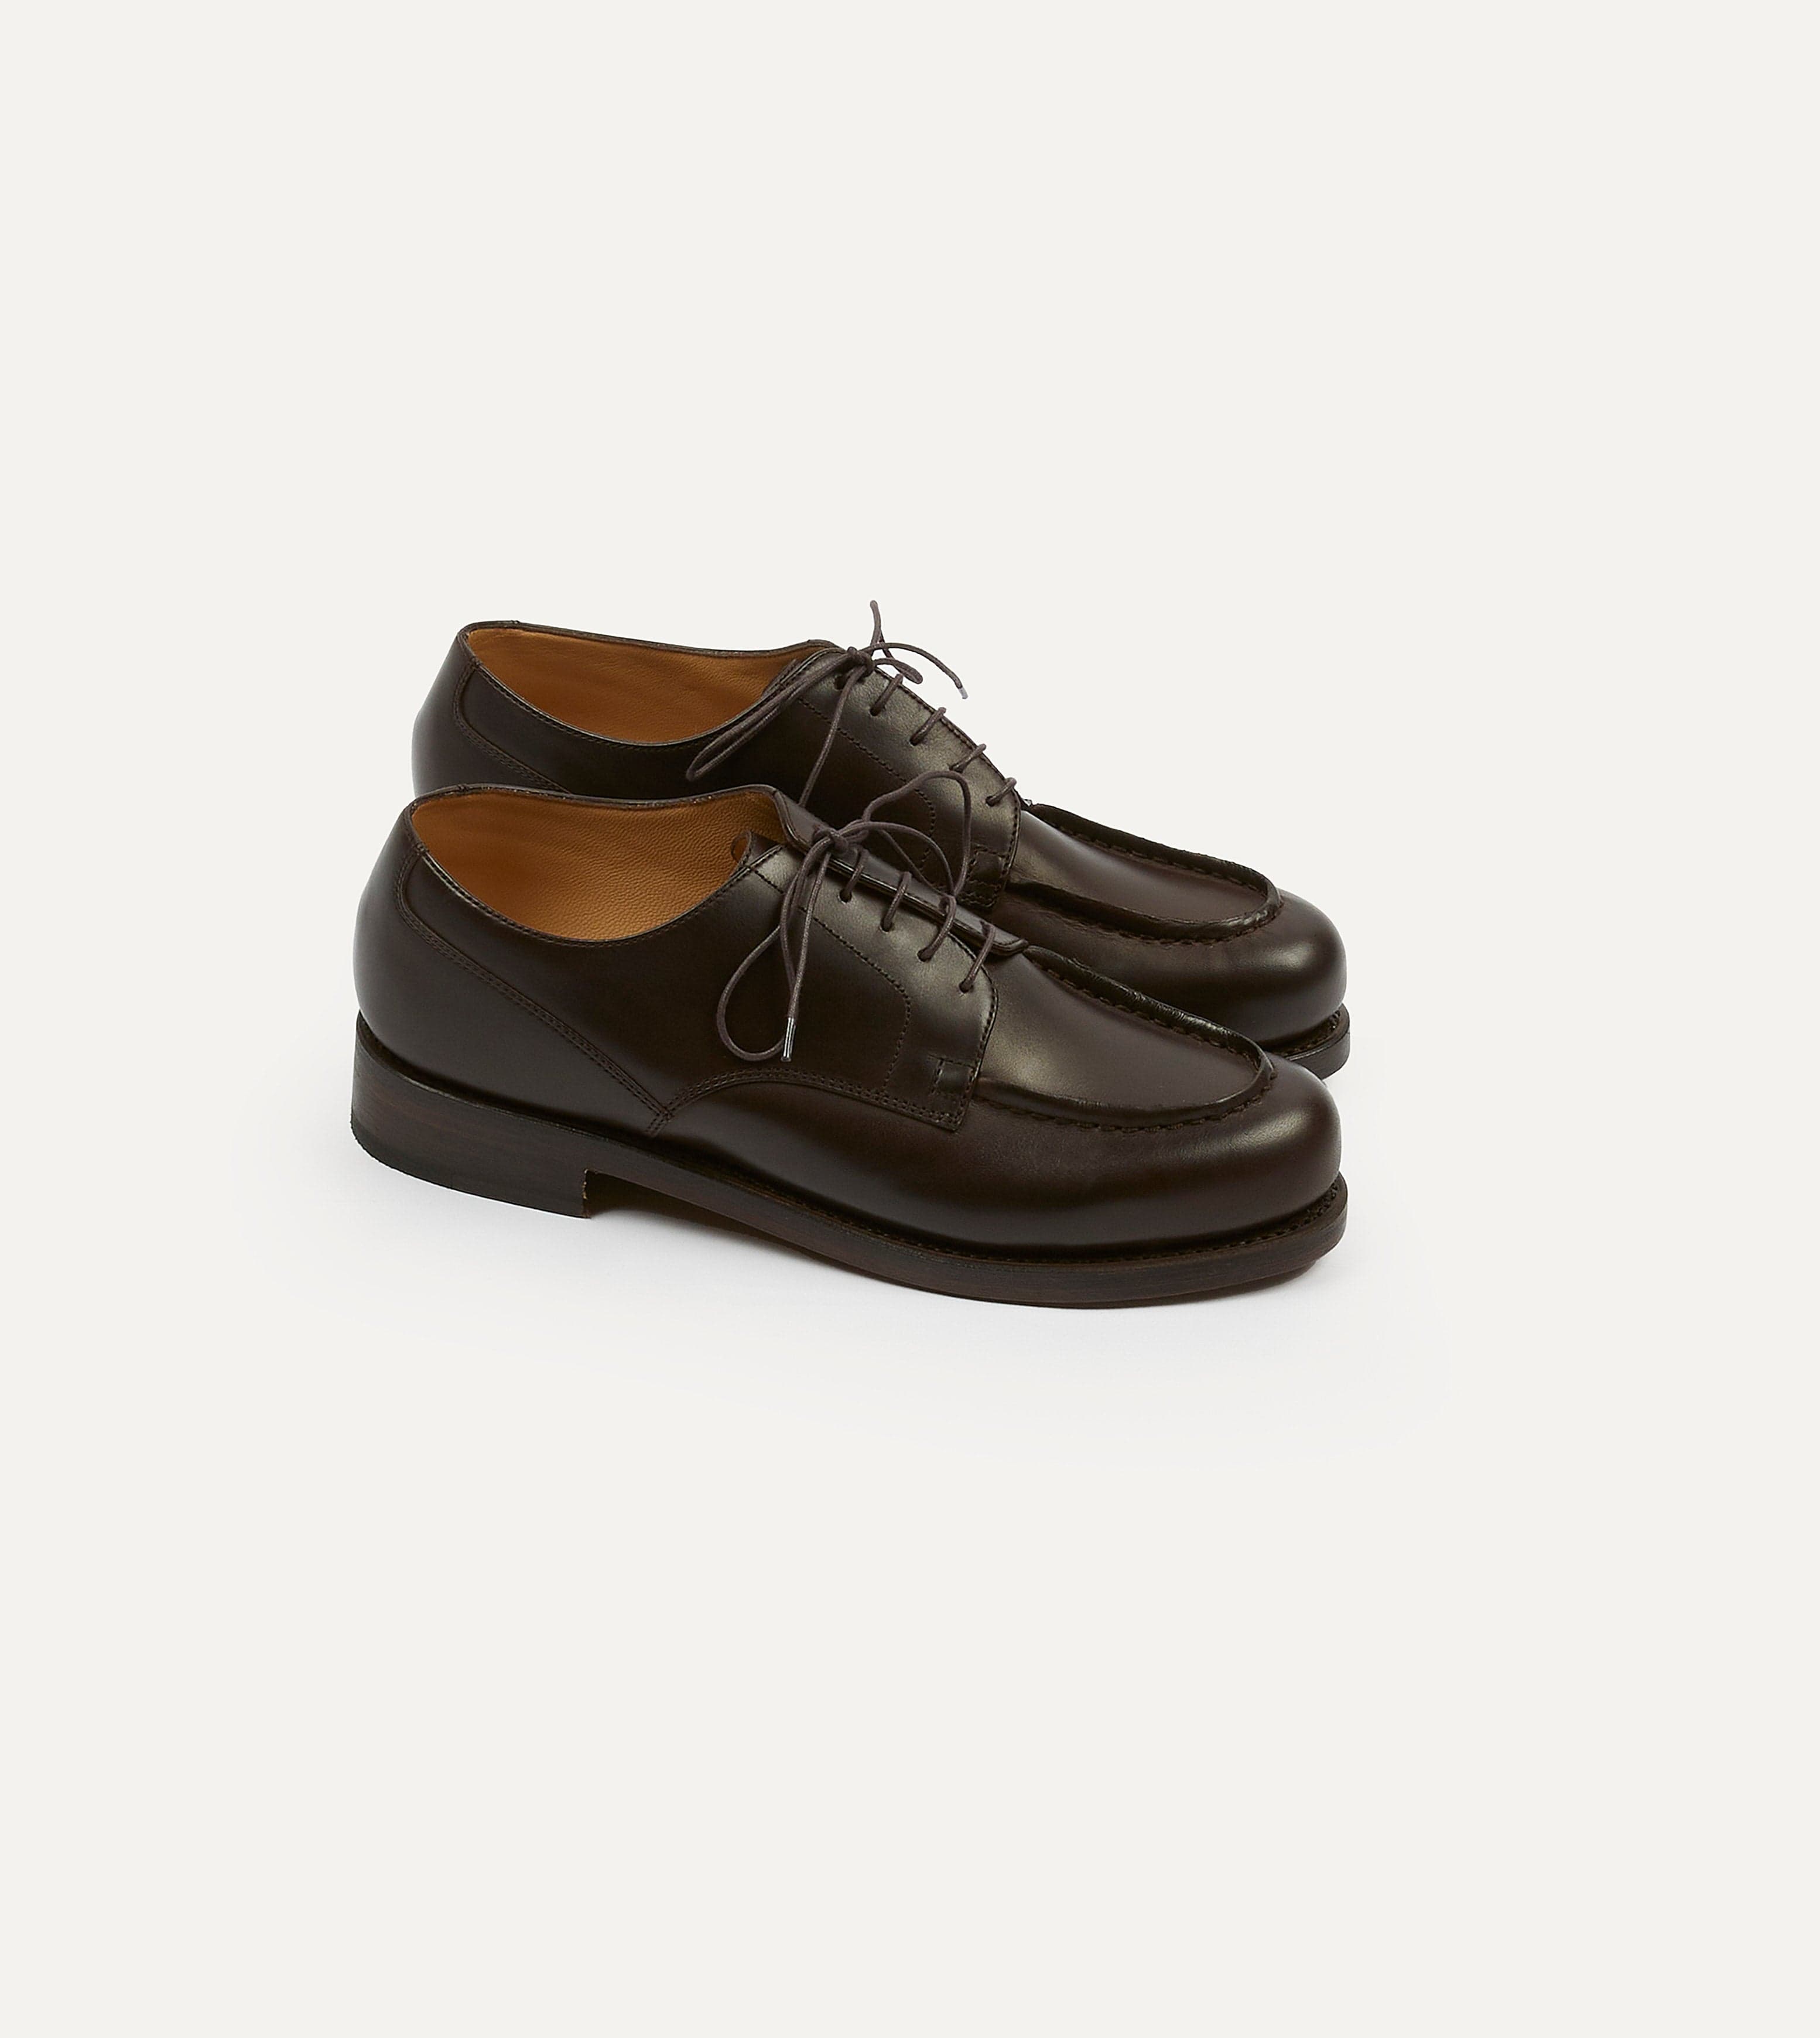 Paraboot Chambord Brown Calf Leather Derby Shoe – Drakes